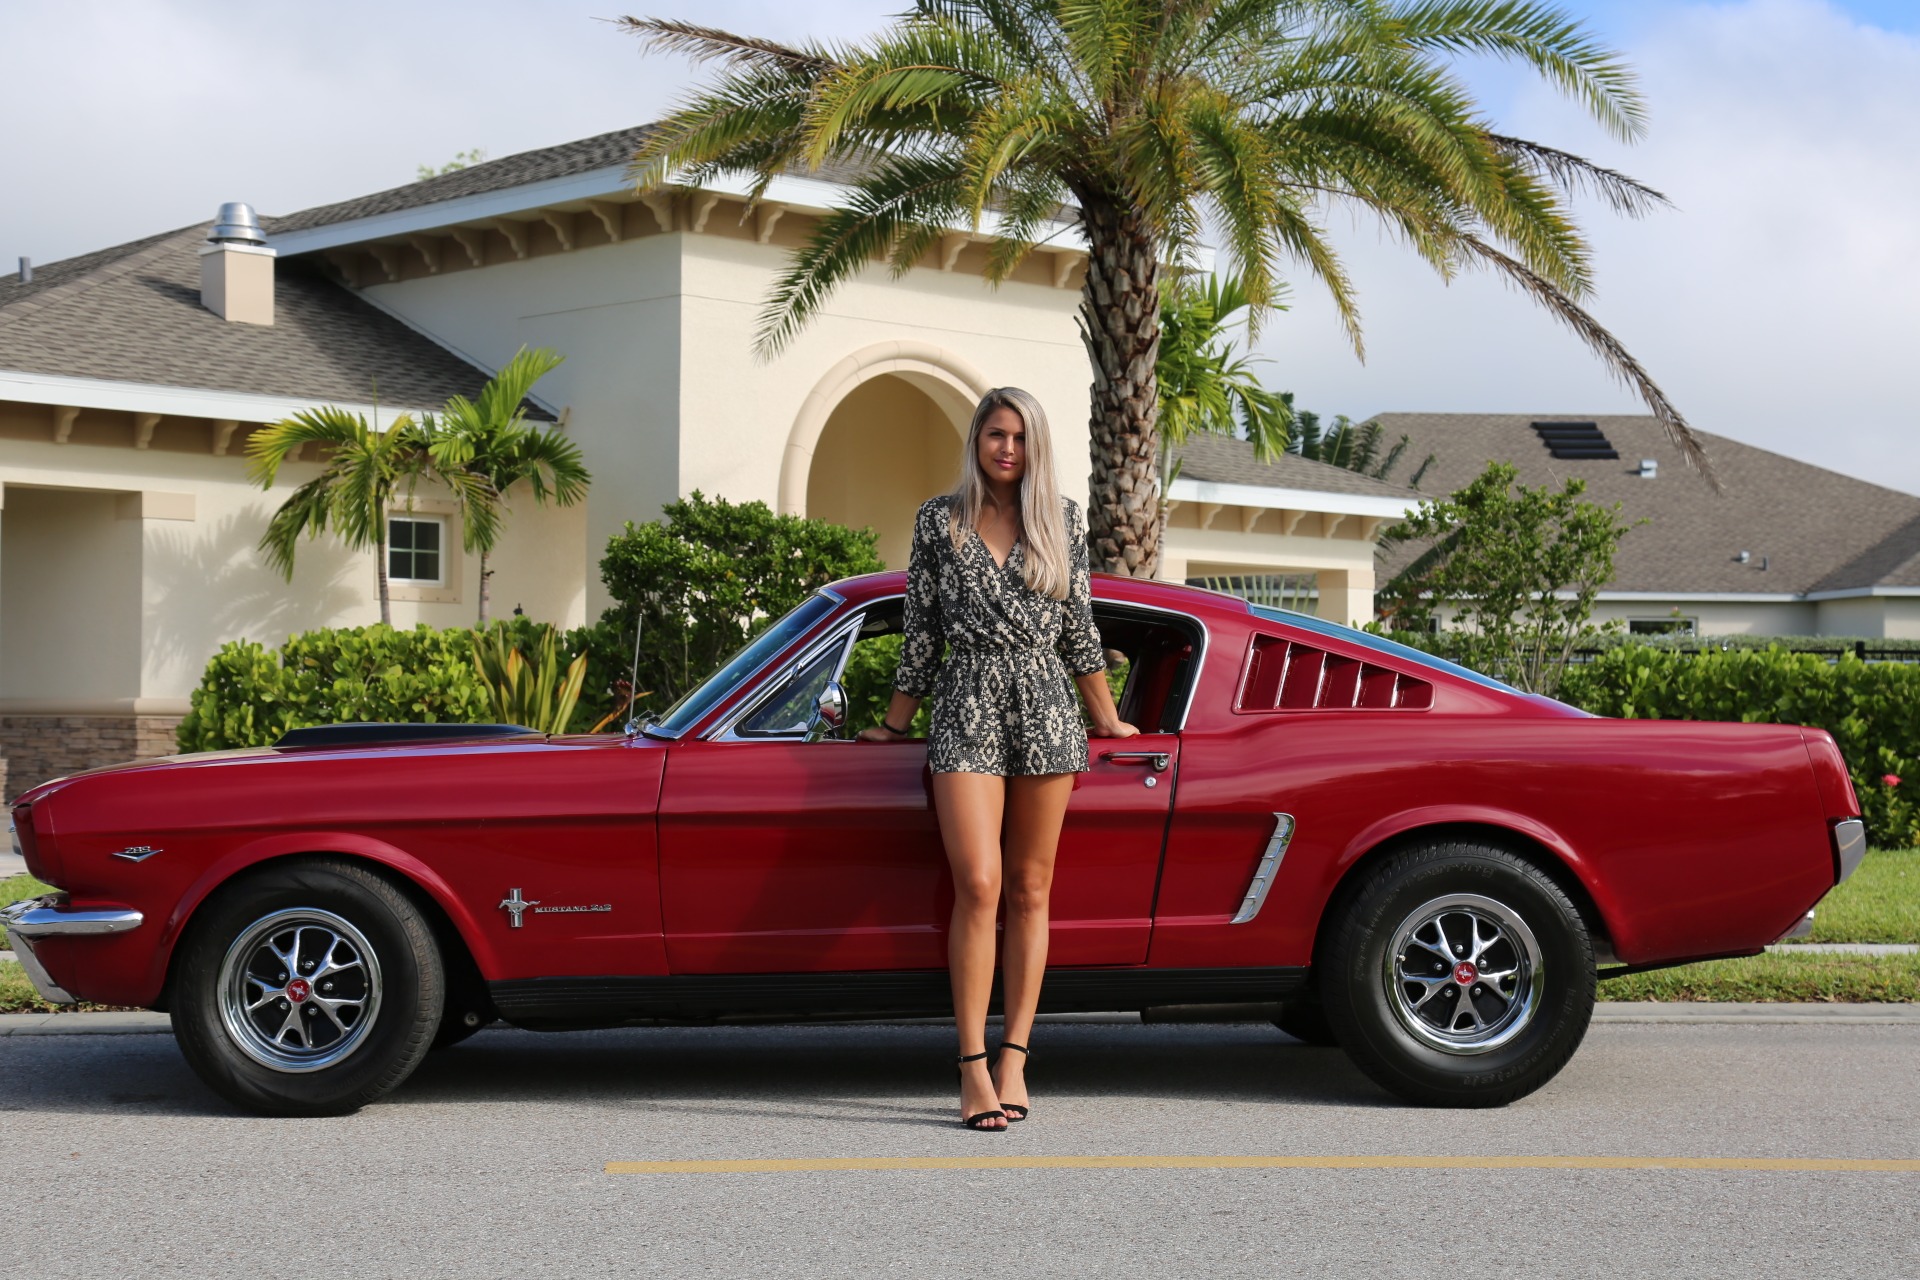 Used 1966 Ford Mustang Fastback 2+2 for sale Sold at Muscle Cars for Sale Inc. in Fort Myers FL 33912 4